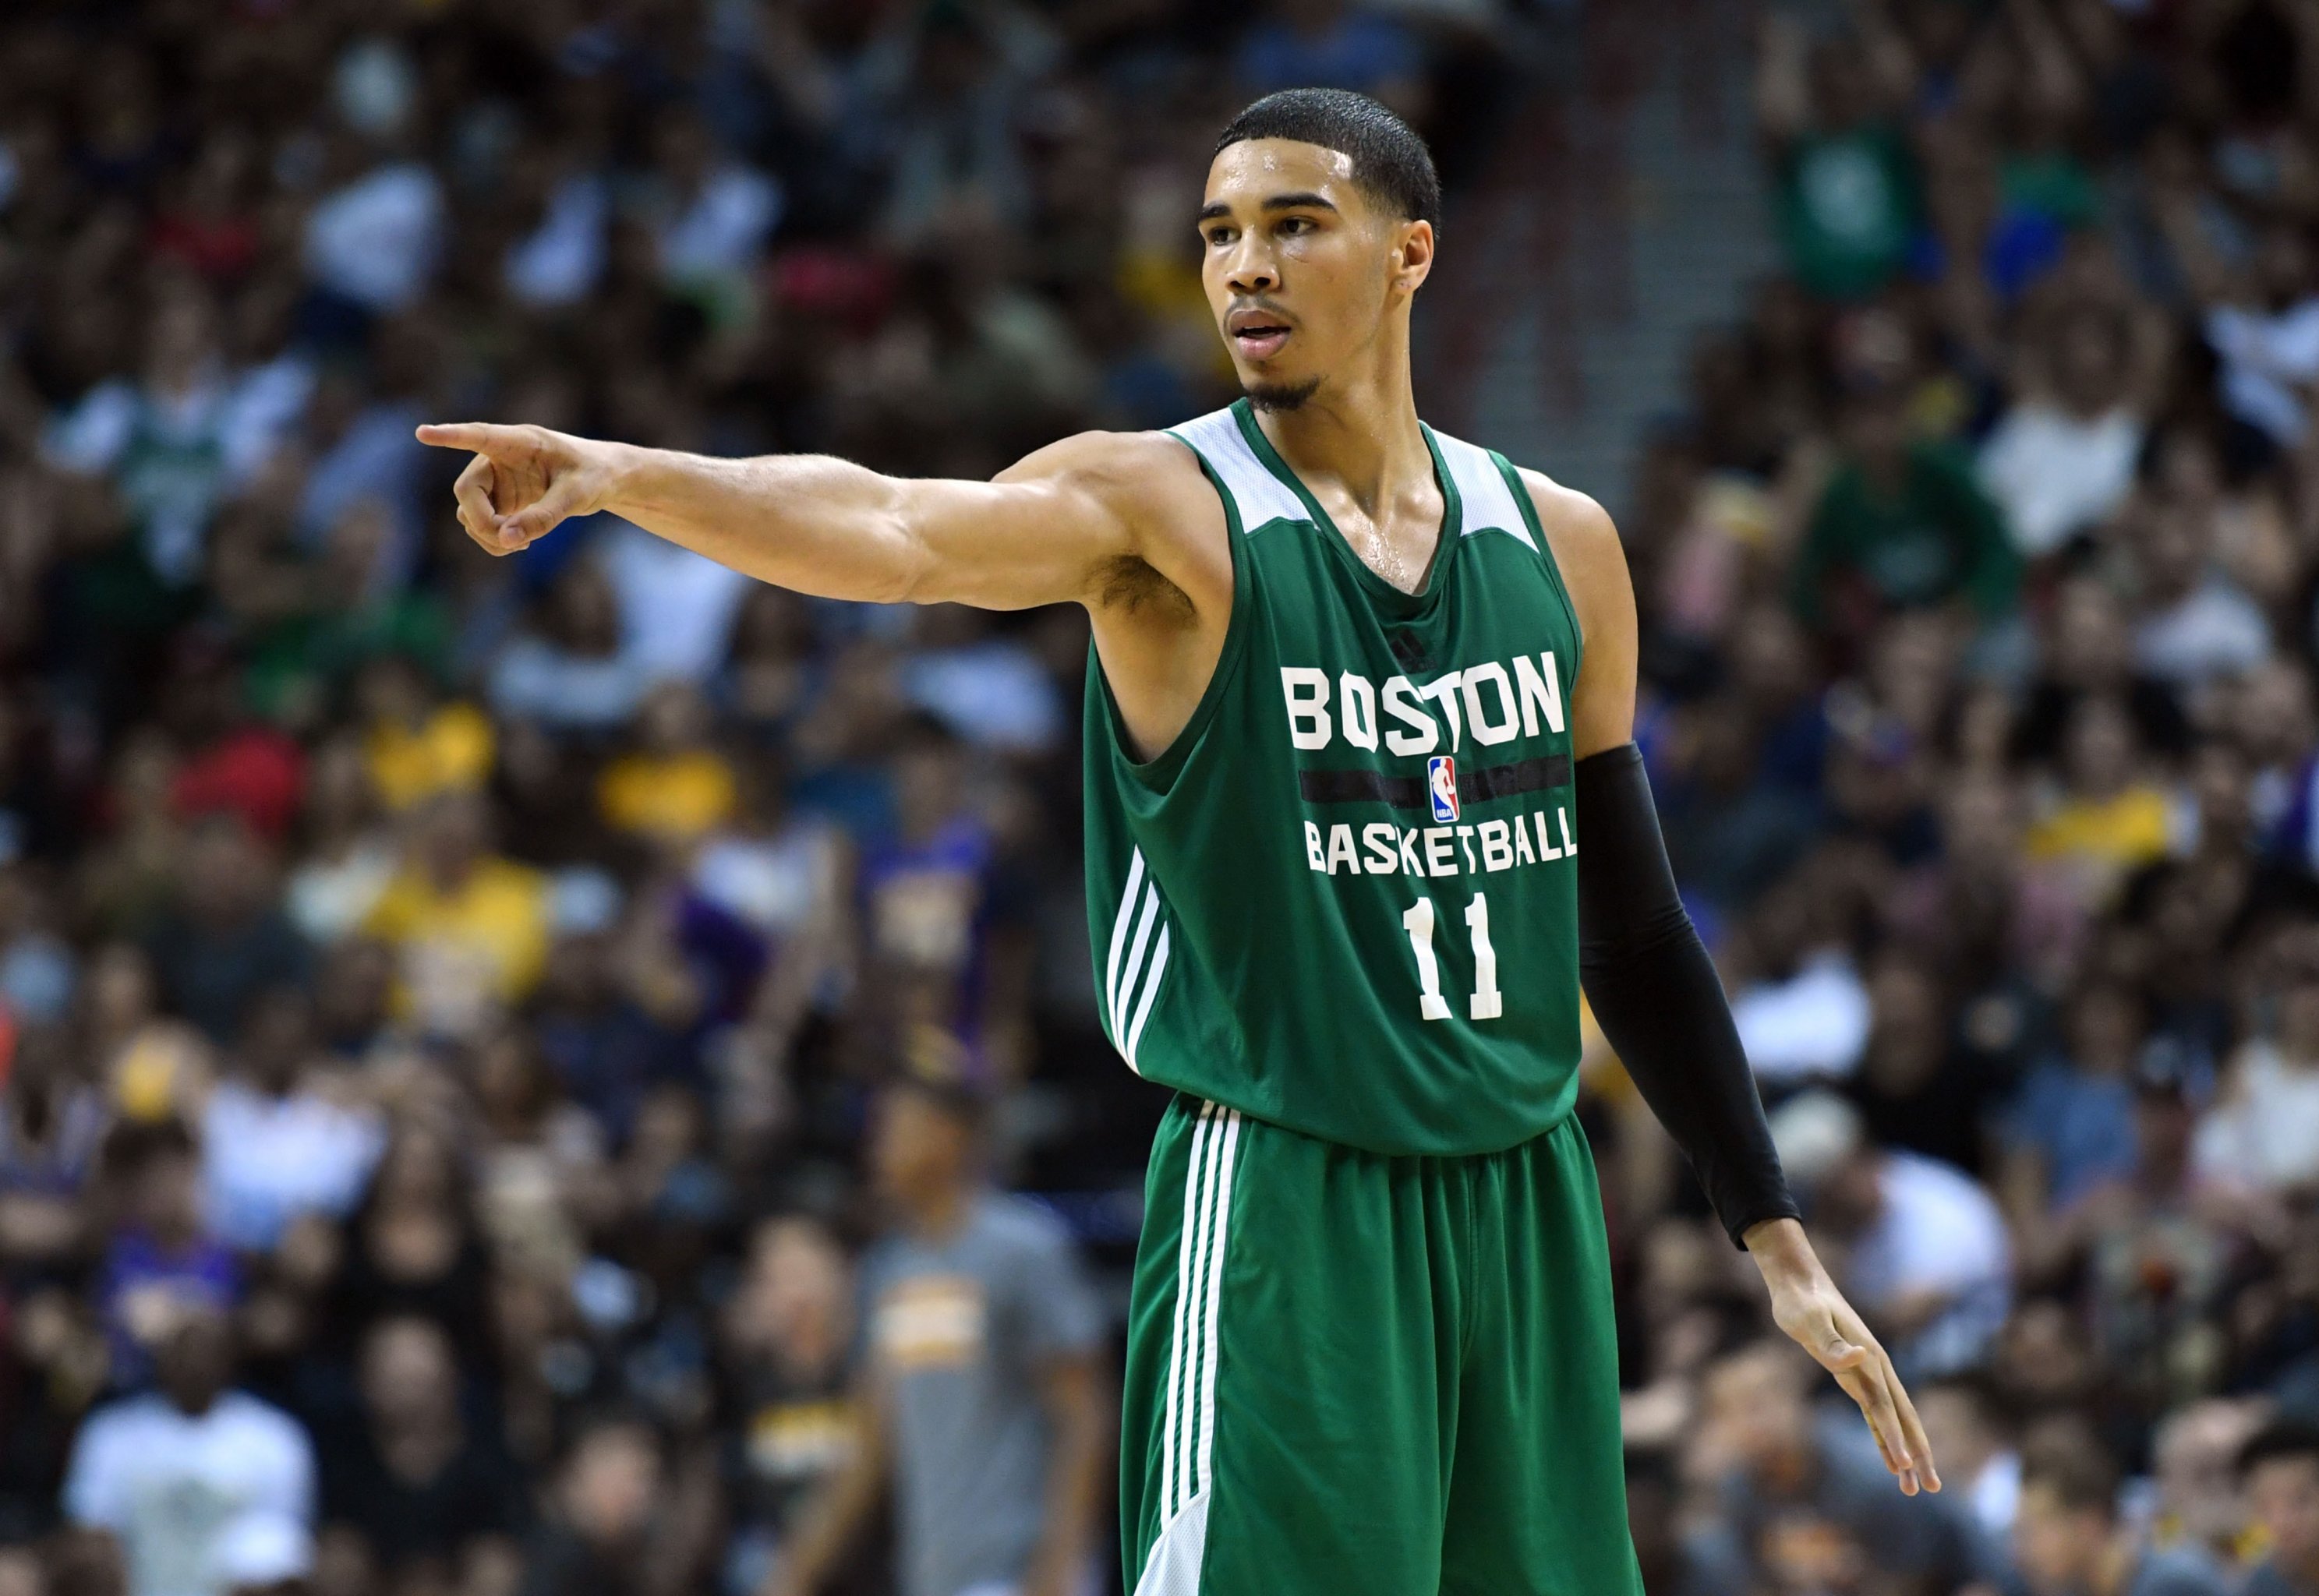 He's looking good': What Jayson Tatum had to say about Markelle Fultz - The  Boston Globe